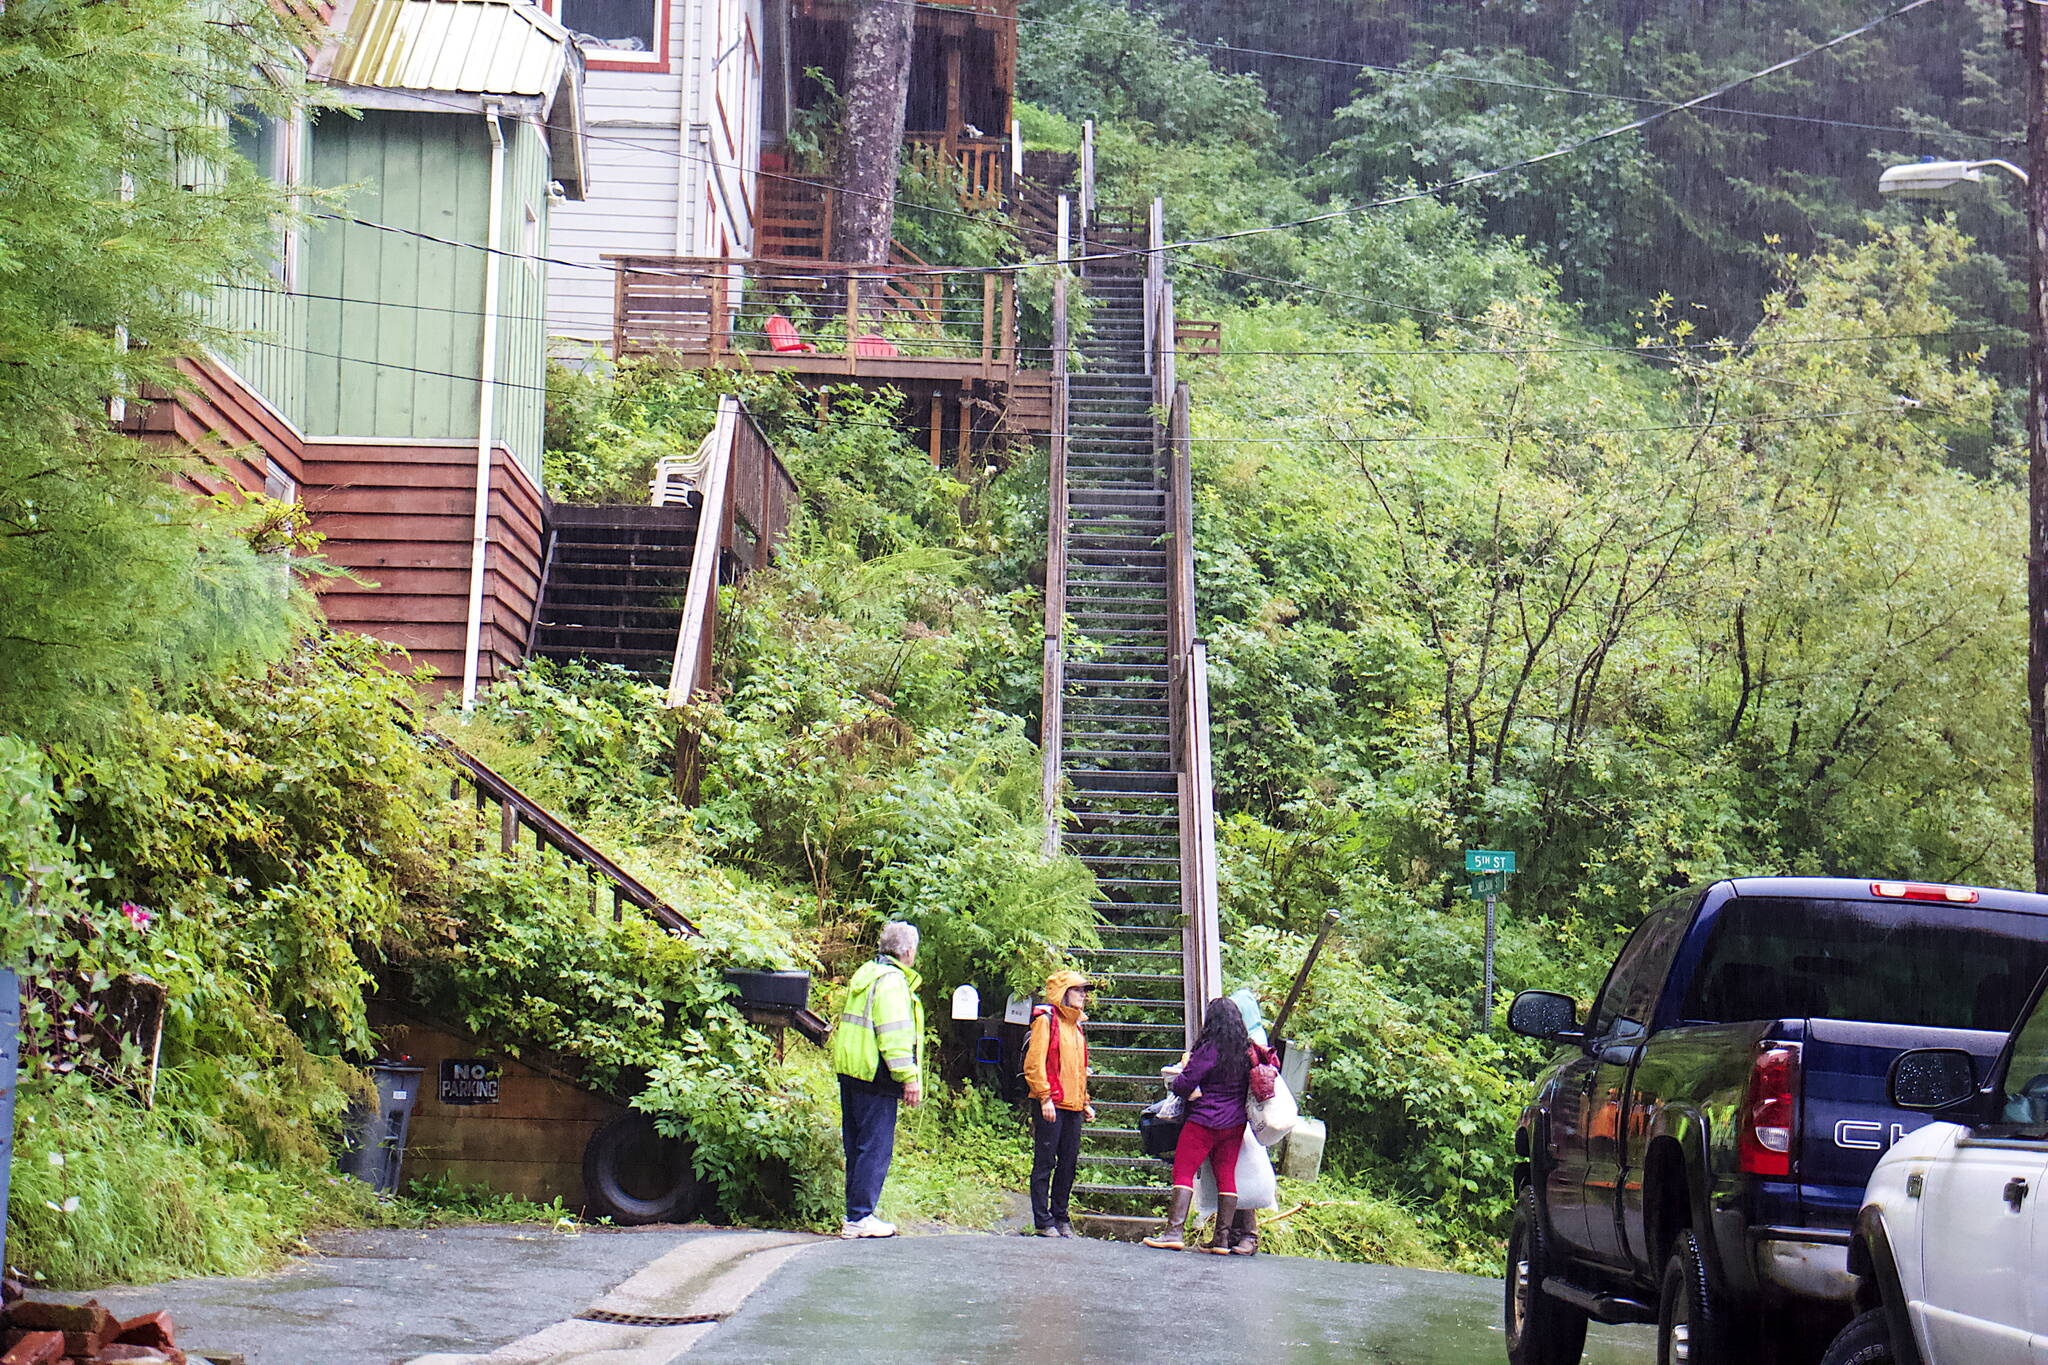 An American Red Cross worker (in orange) advises people evacuating belongings from a house on Nelson Street following a small landslide Saturday evening. City officials ordered the evacuation of homes near the slide, and issued a notice asking people to stay away from the landslide area and for people in high-slope areas to be aware of landslide risks due to heavy rain. (Mark Sabbatini / Juneau Empire)